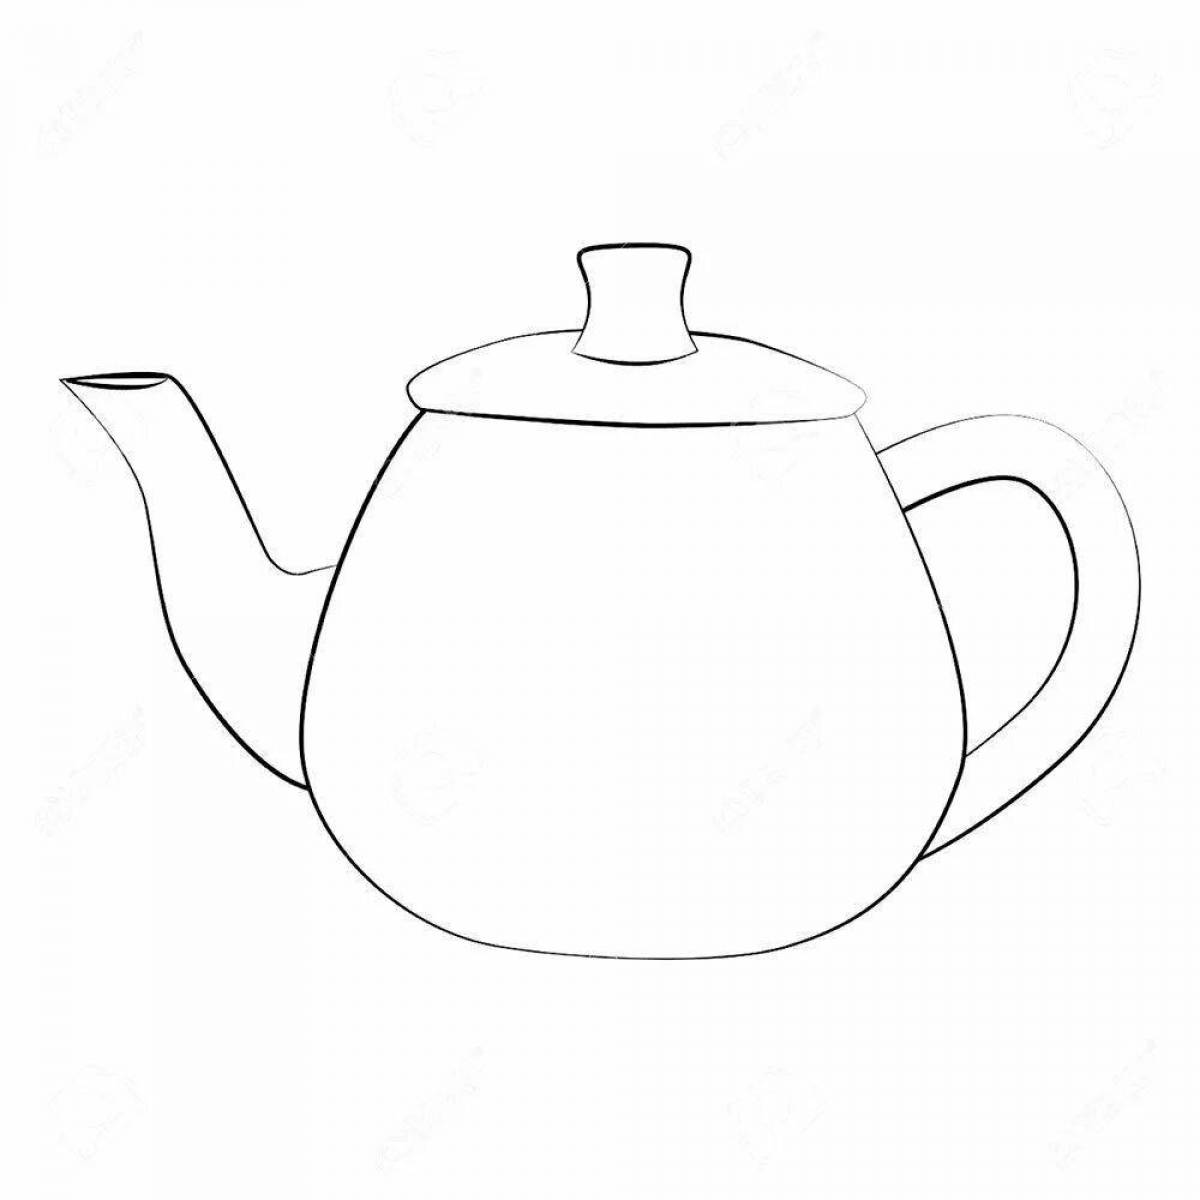 Coloring book shining teapot for babies